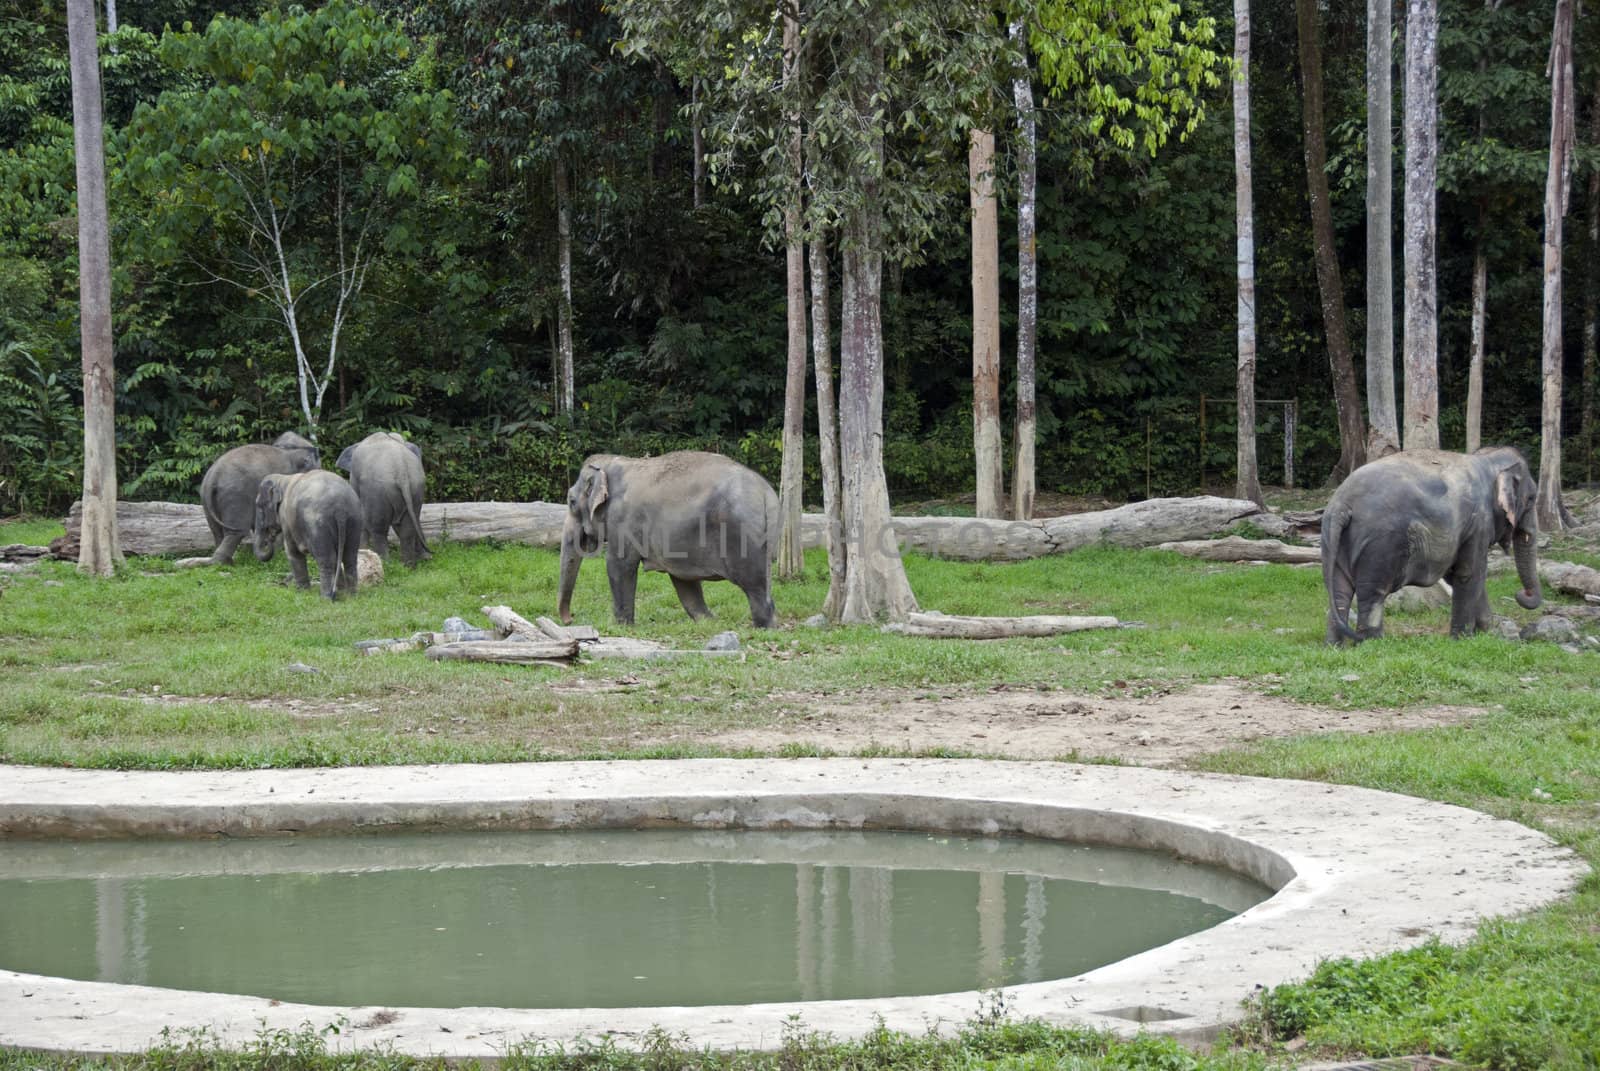 elephants in Malaysia in the place Gandah